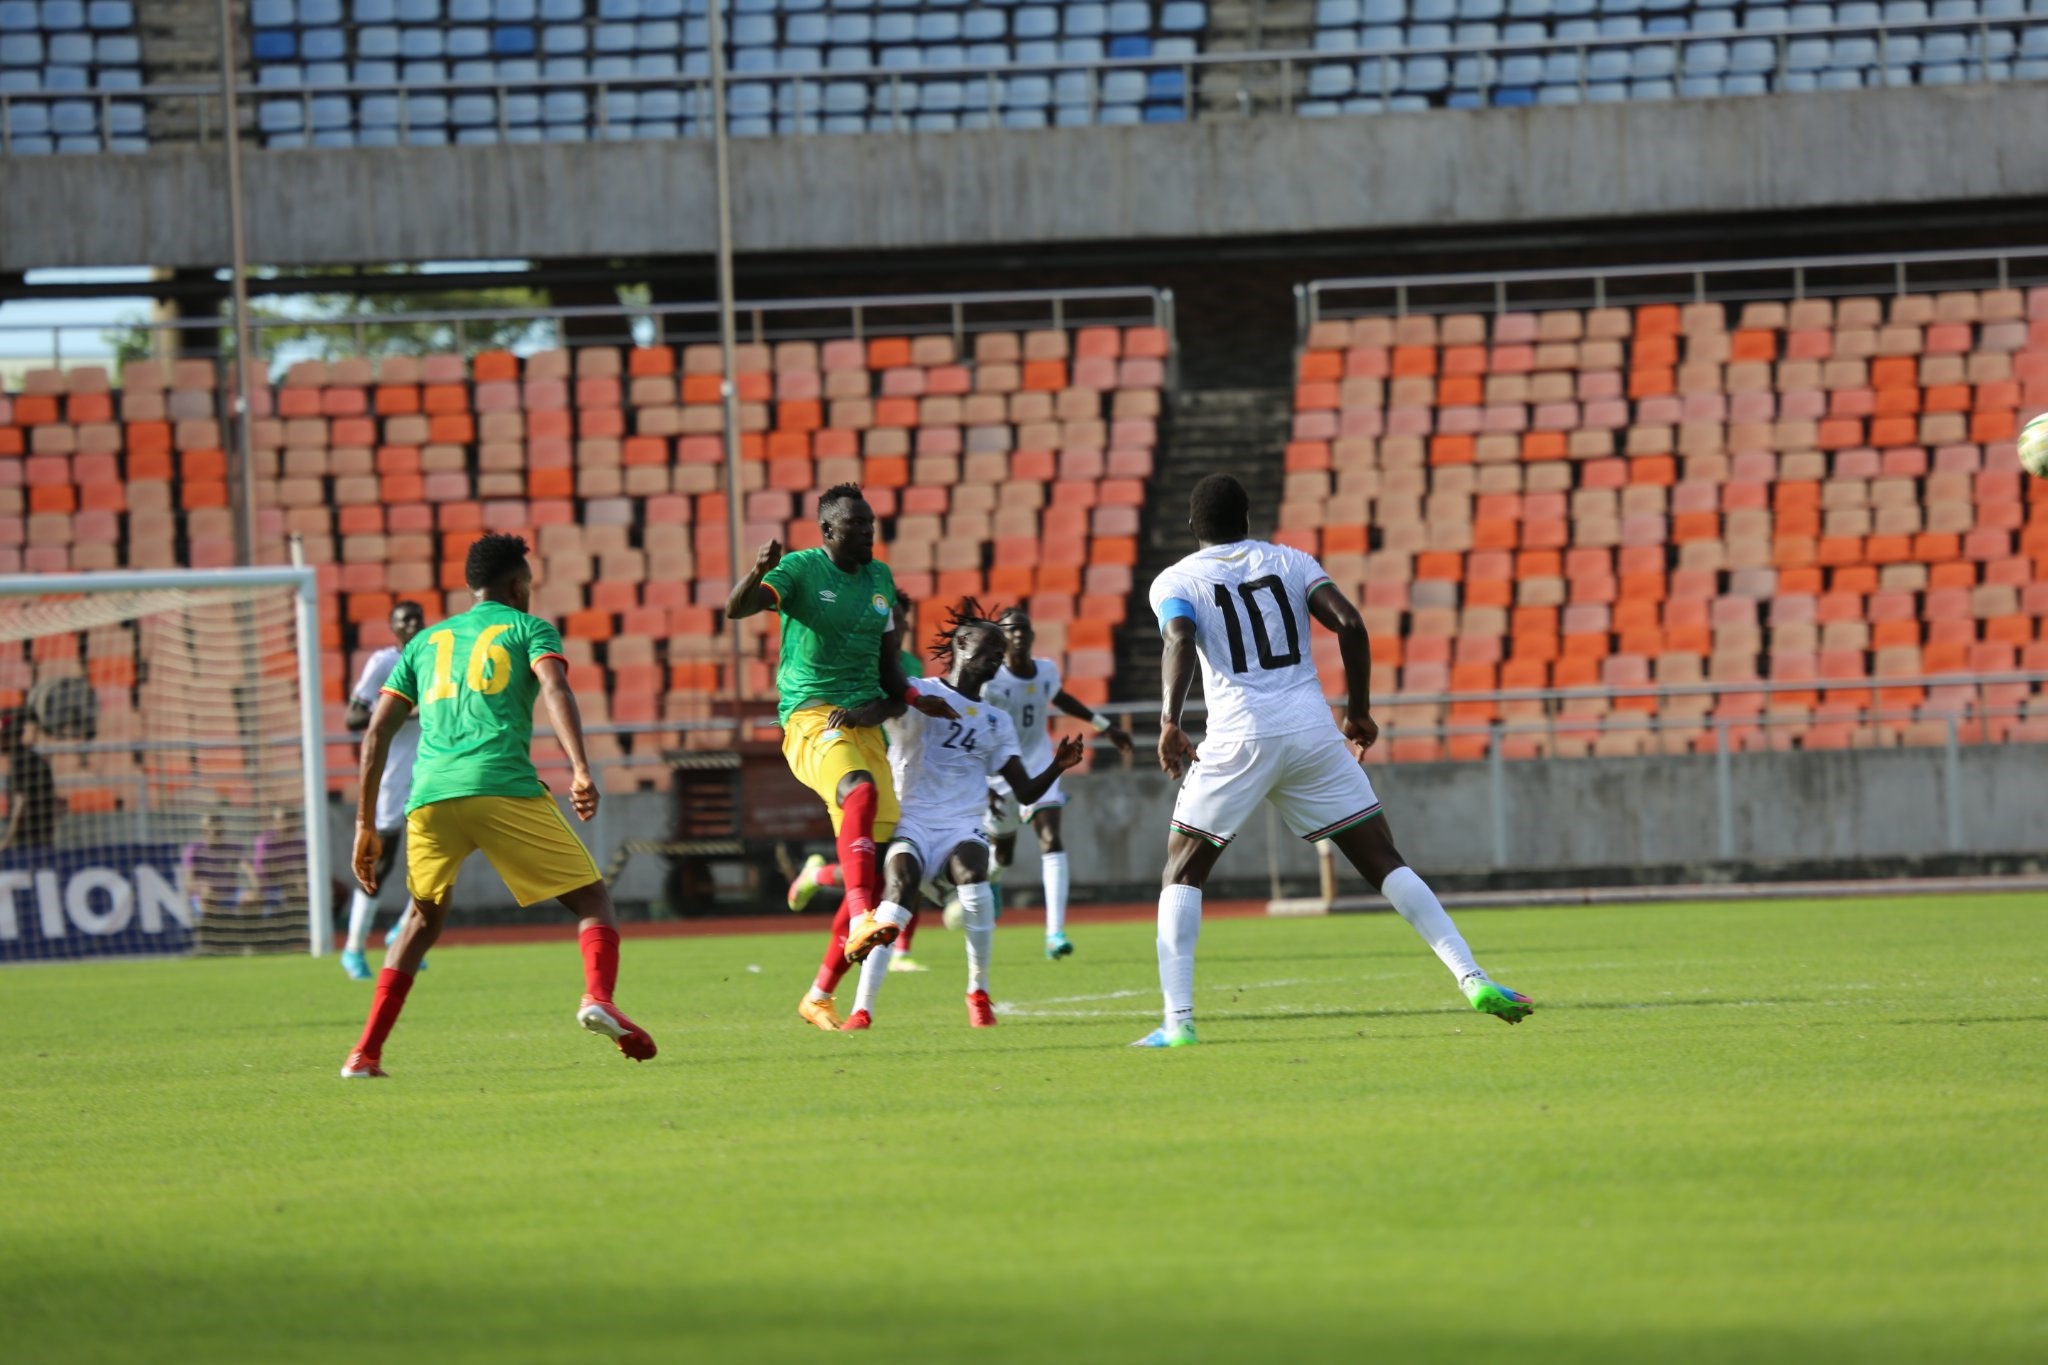 South Sudan’s tie against Ethiopia ends goalless to extend team’s hope